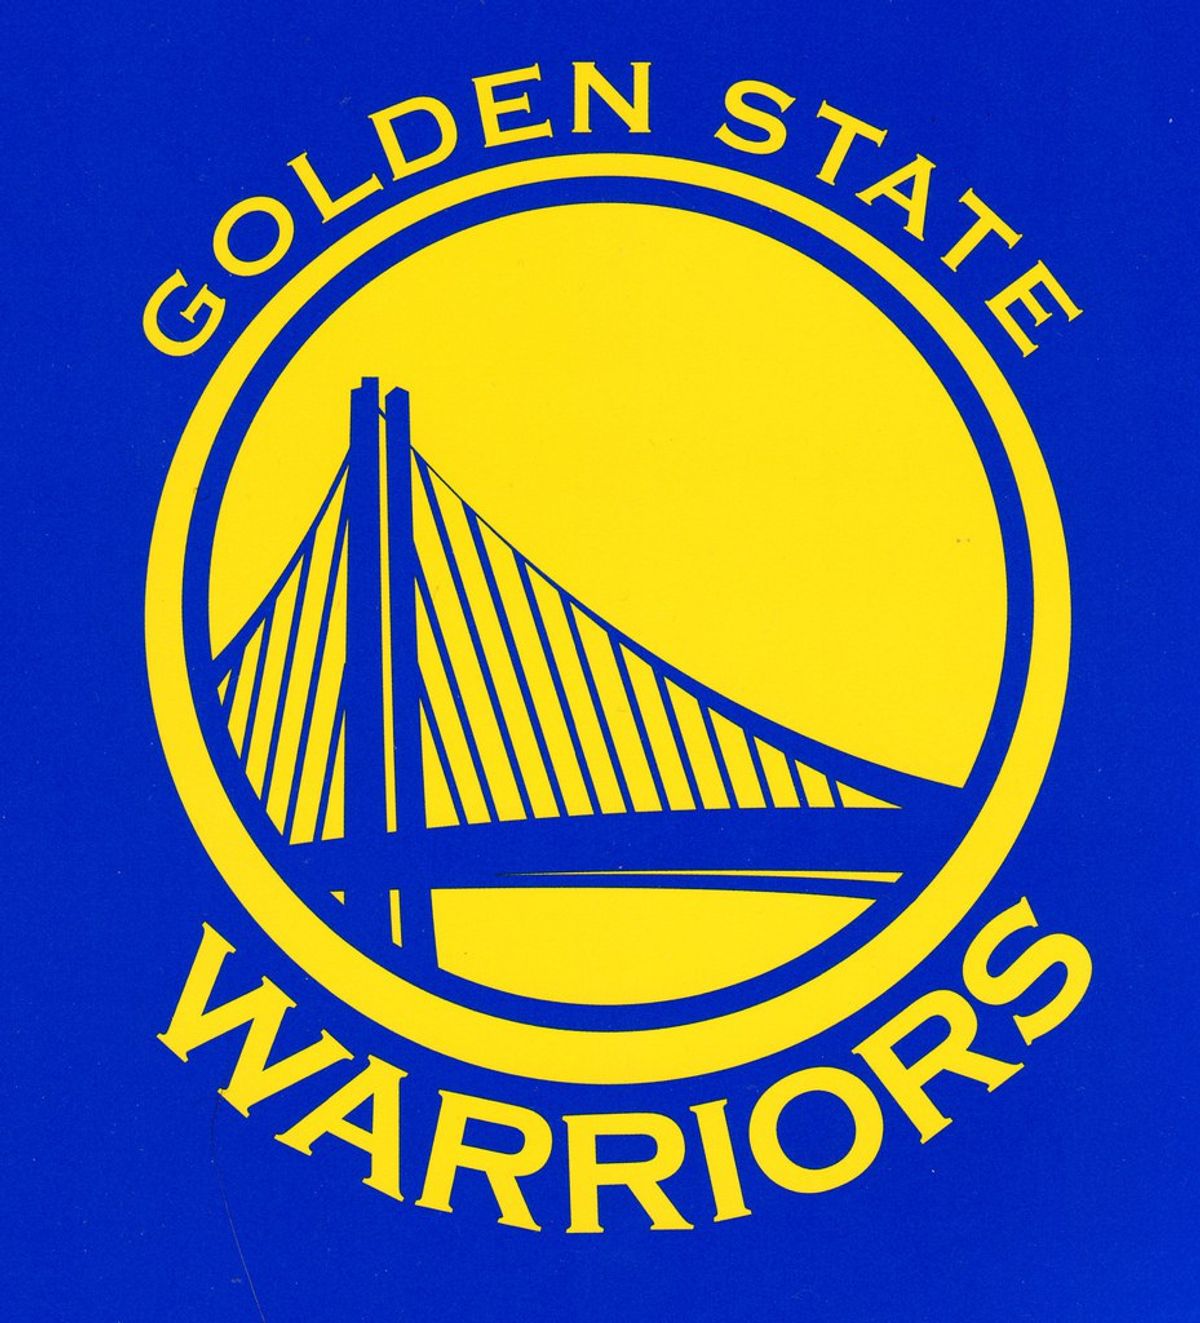 A Warriors' Resolve: Golden State Will Rally